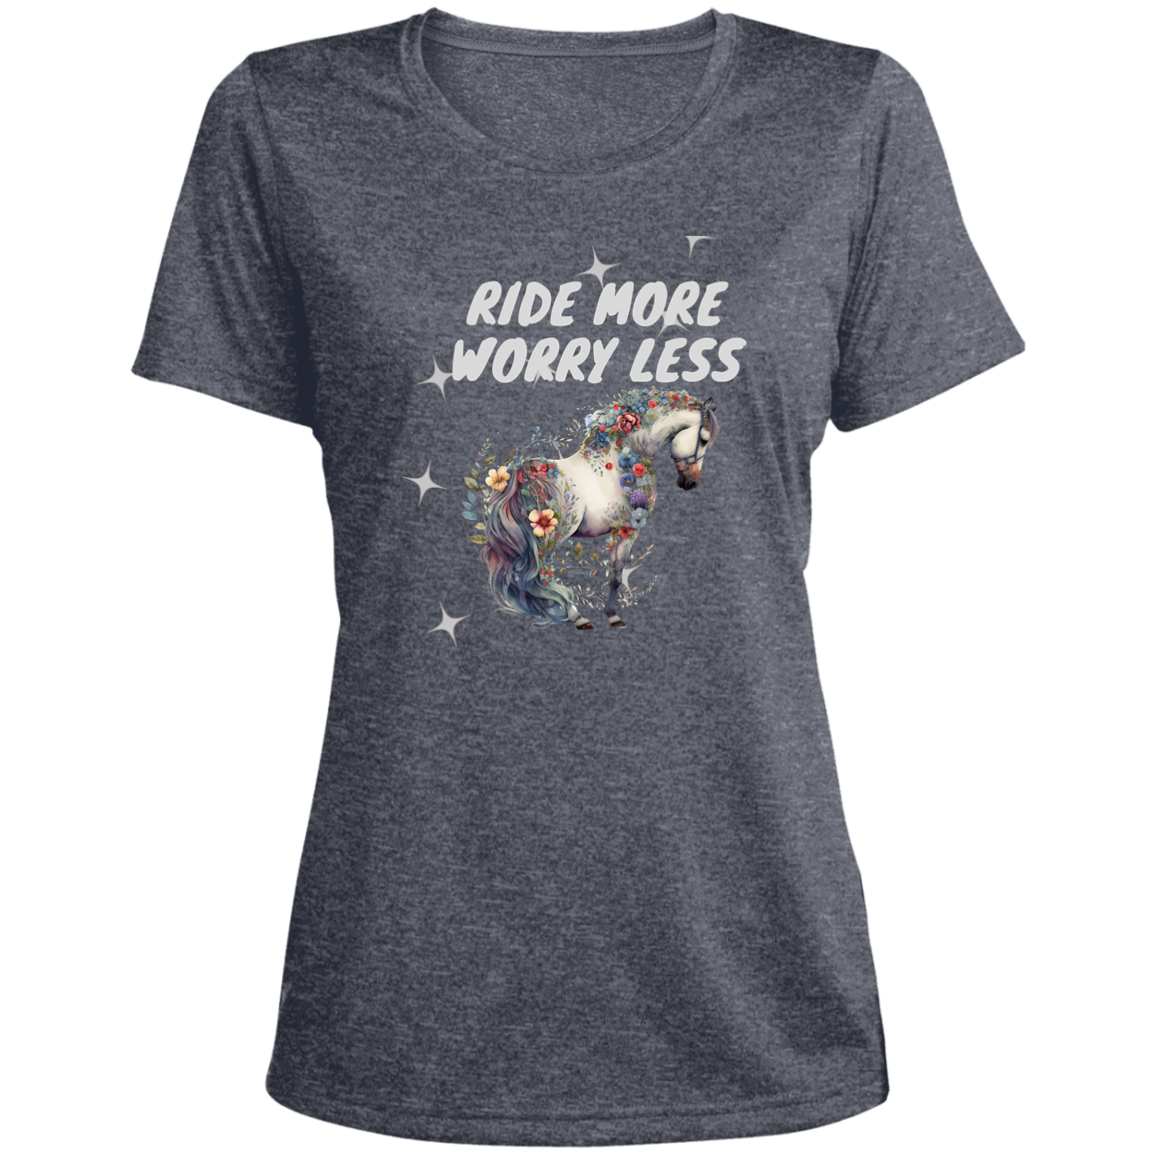 Ride More Worry Less Women's T-Shirt, Gift Idea, Mother's Day, Birthday, Special Occasion, Just For You Gift - MyAllOutHorses